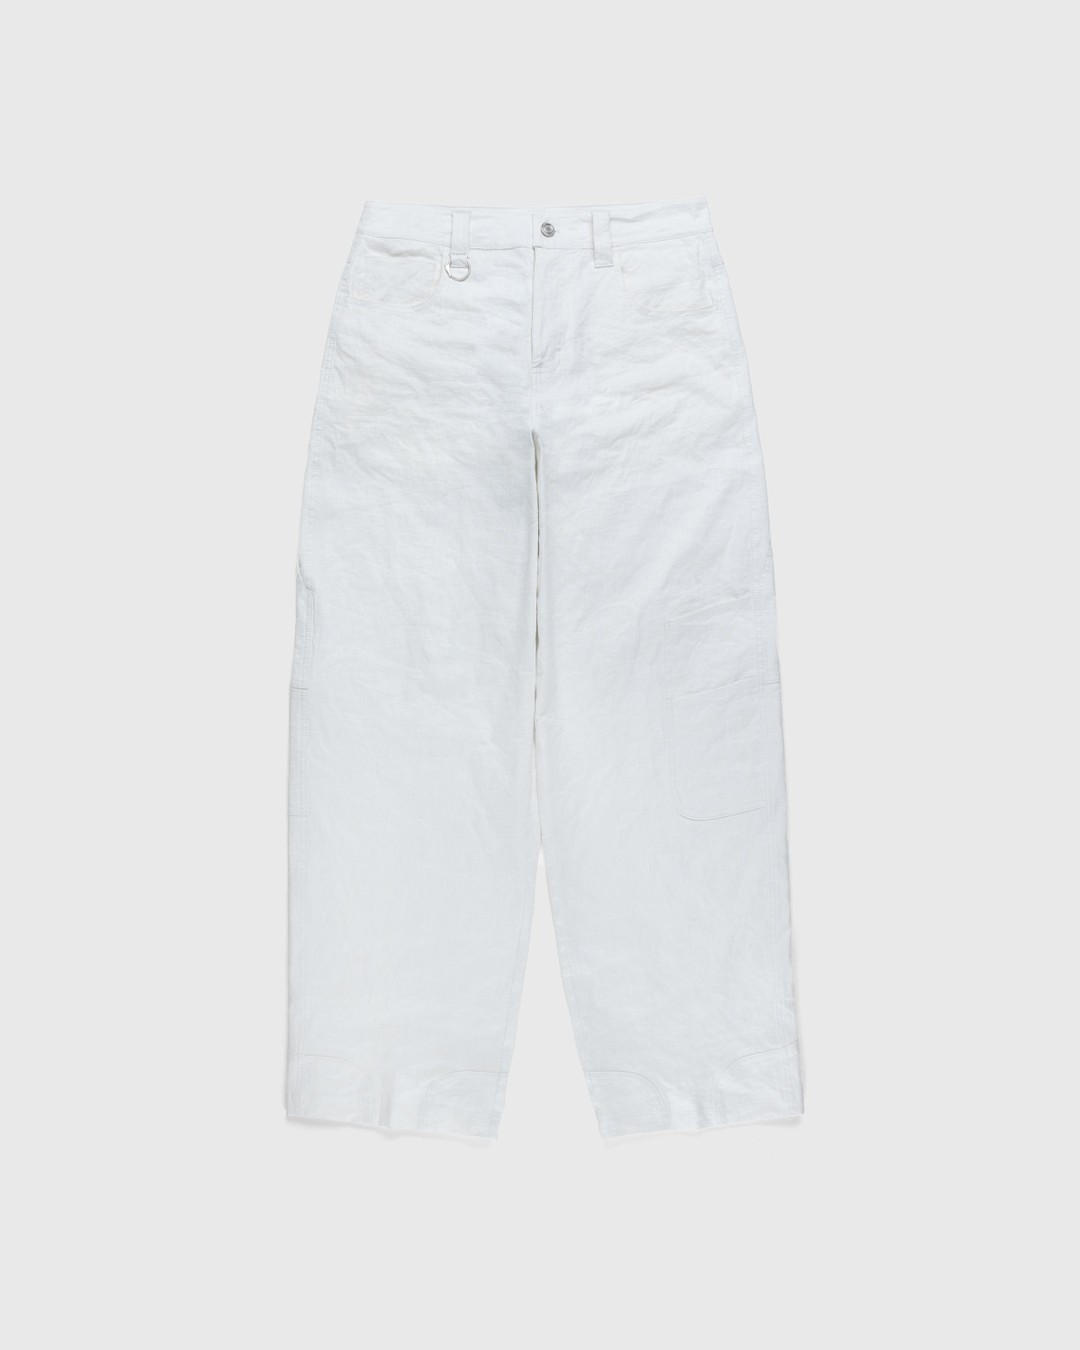 Trussardi – Wrinkled Cotton Trousers White - Pants - White - Image 1